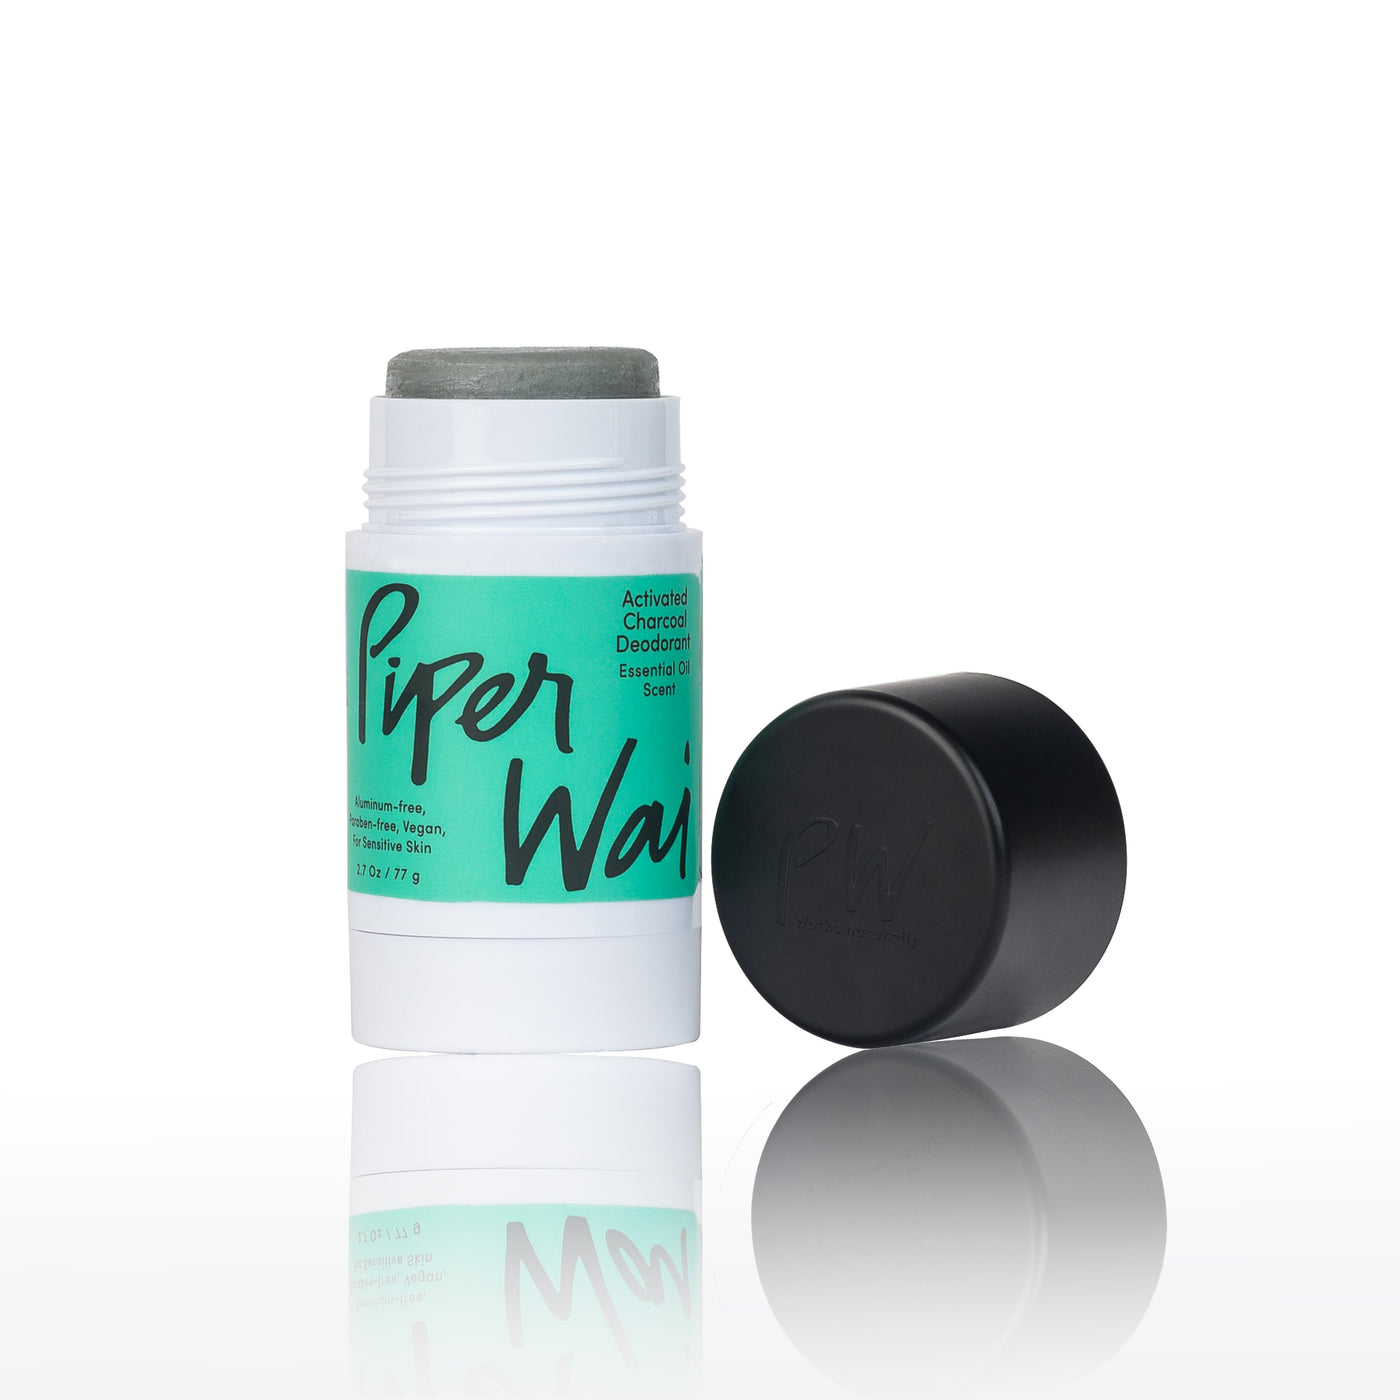 Natural Deodorant Stick without Aluminum, Activated Charcoal by PiperWai Natural Deodorant